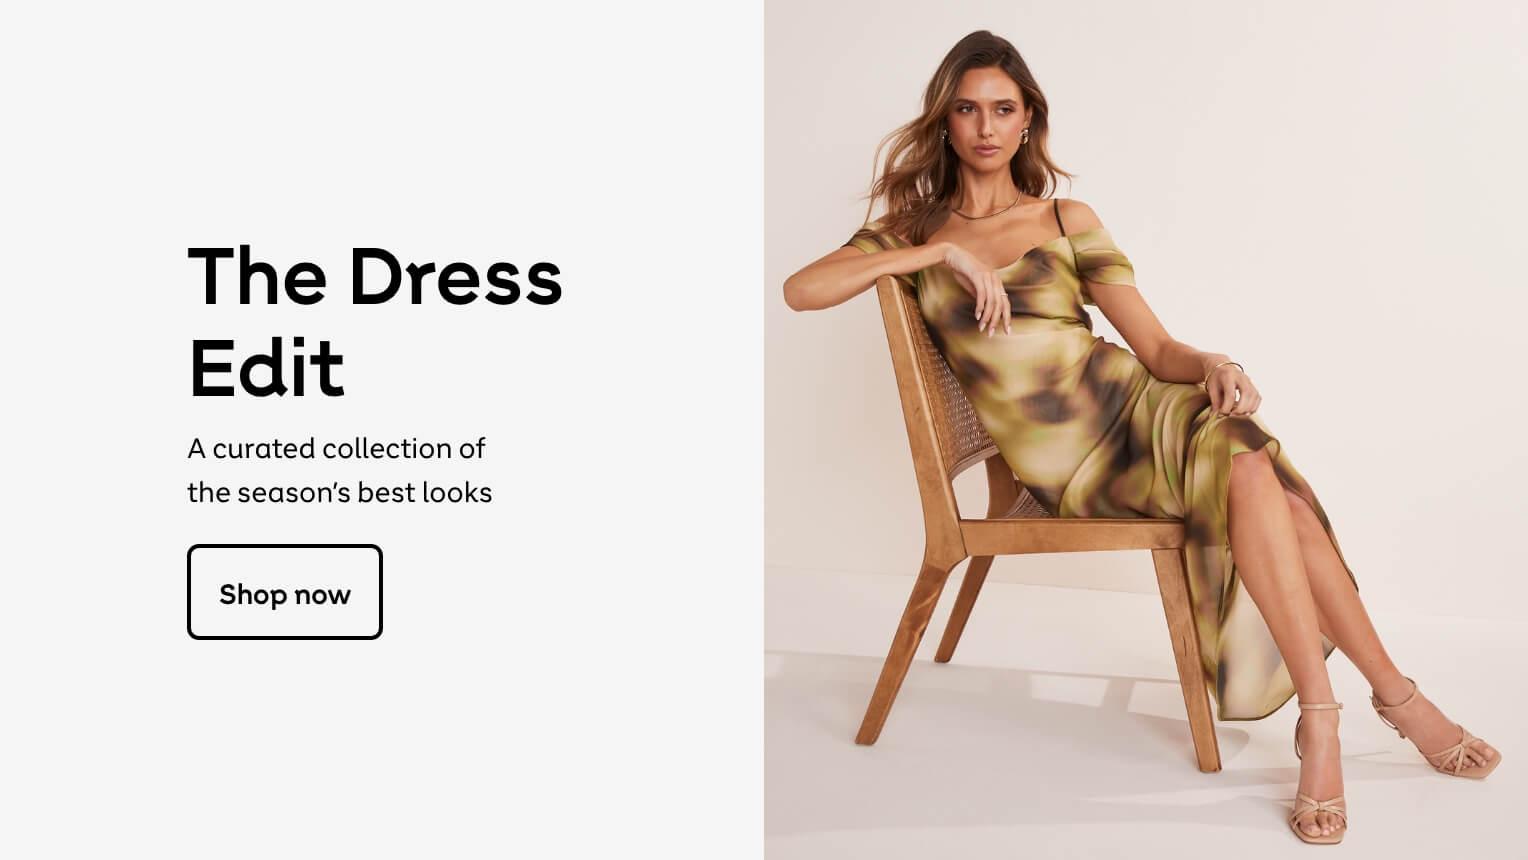 The Dress Edit. A curated collection of the season's best looks. Shop now.